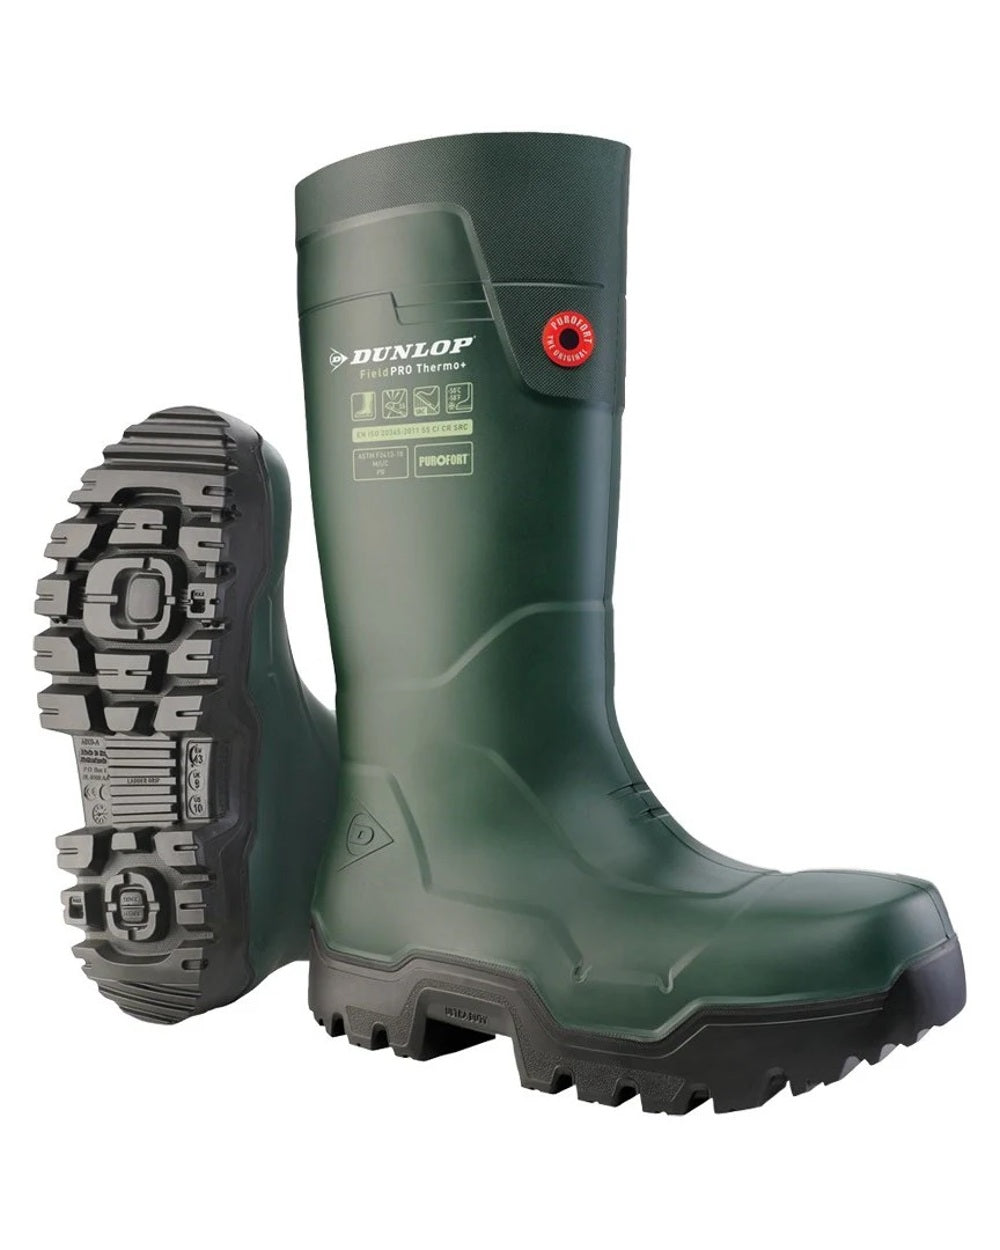 Heritage Green/Black coloured Dunlop FieldPro Thermo Plus Safety Wellingtons on white background 